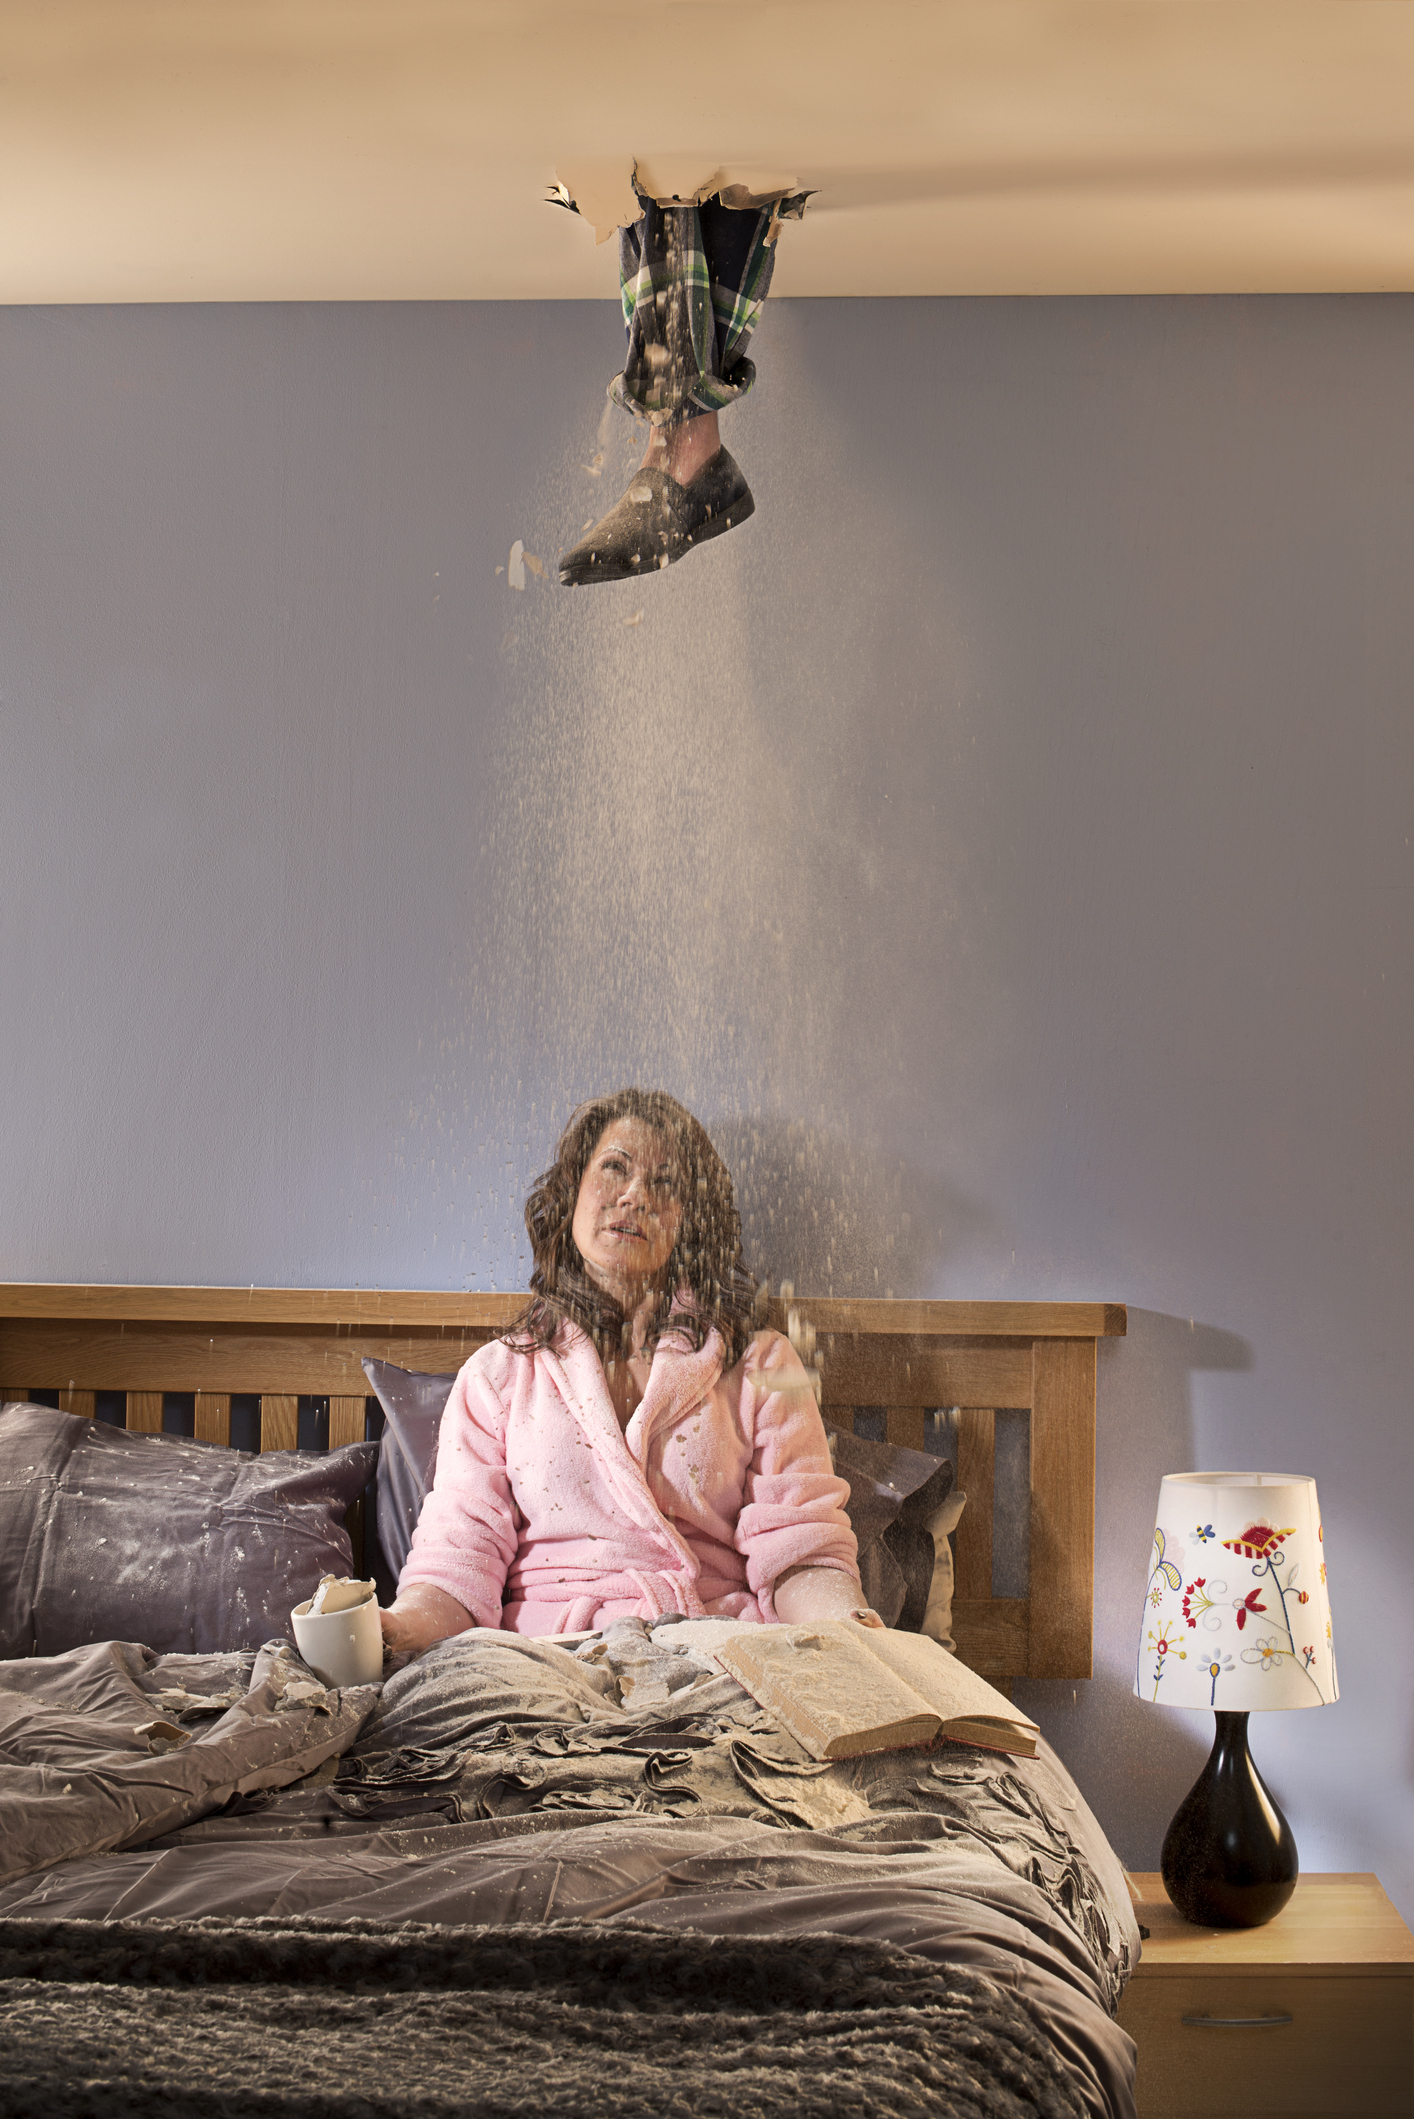 Person sitting in bed with a burst ceiling above, creating a dust explosion